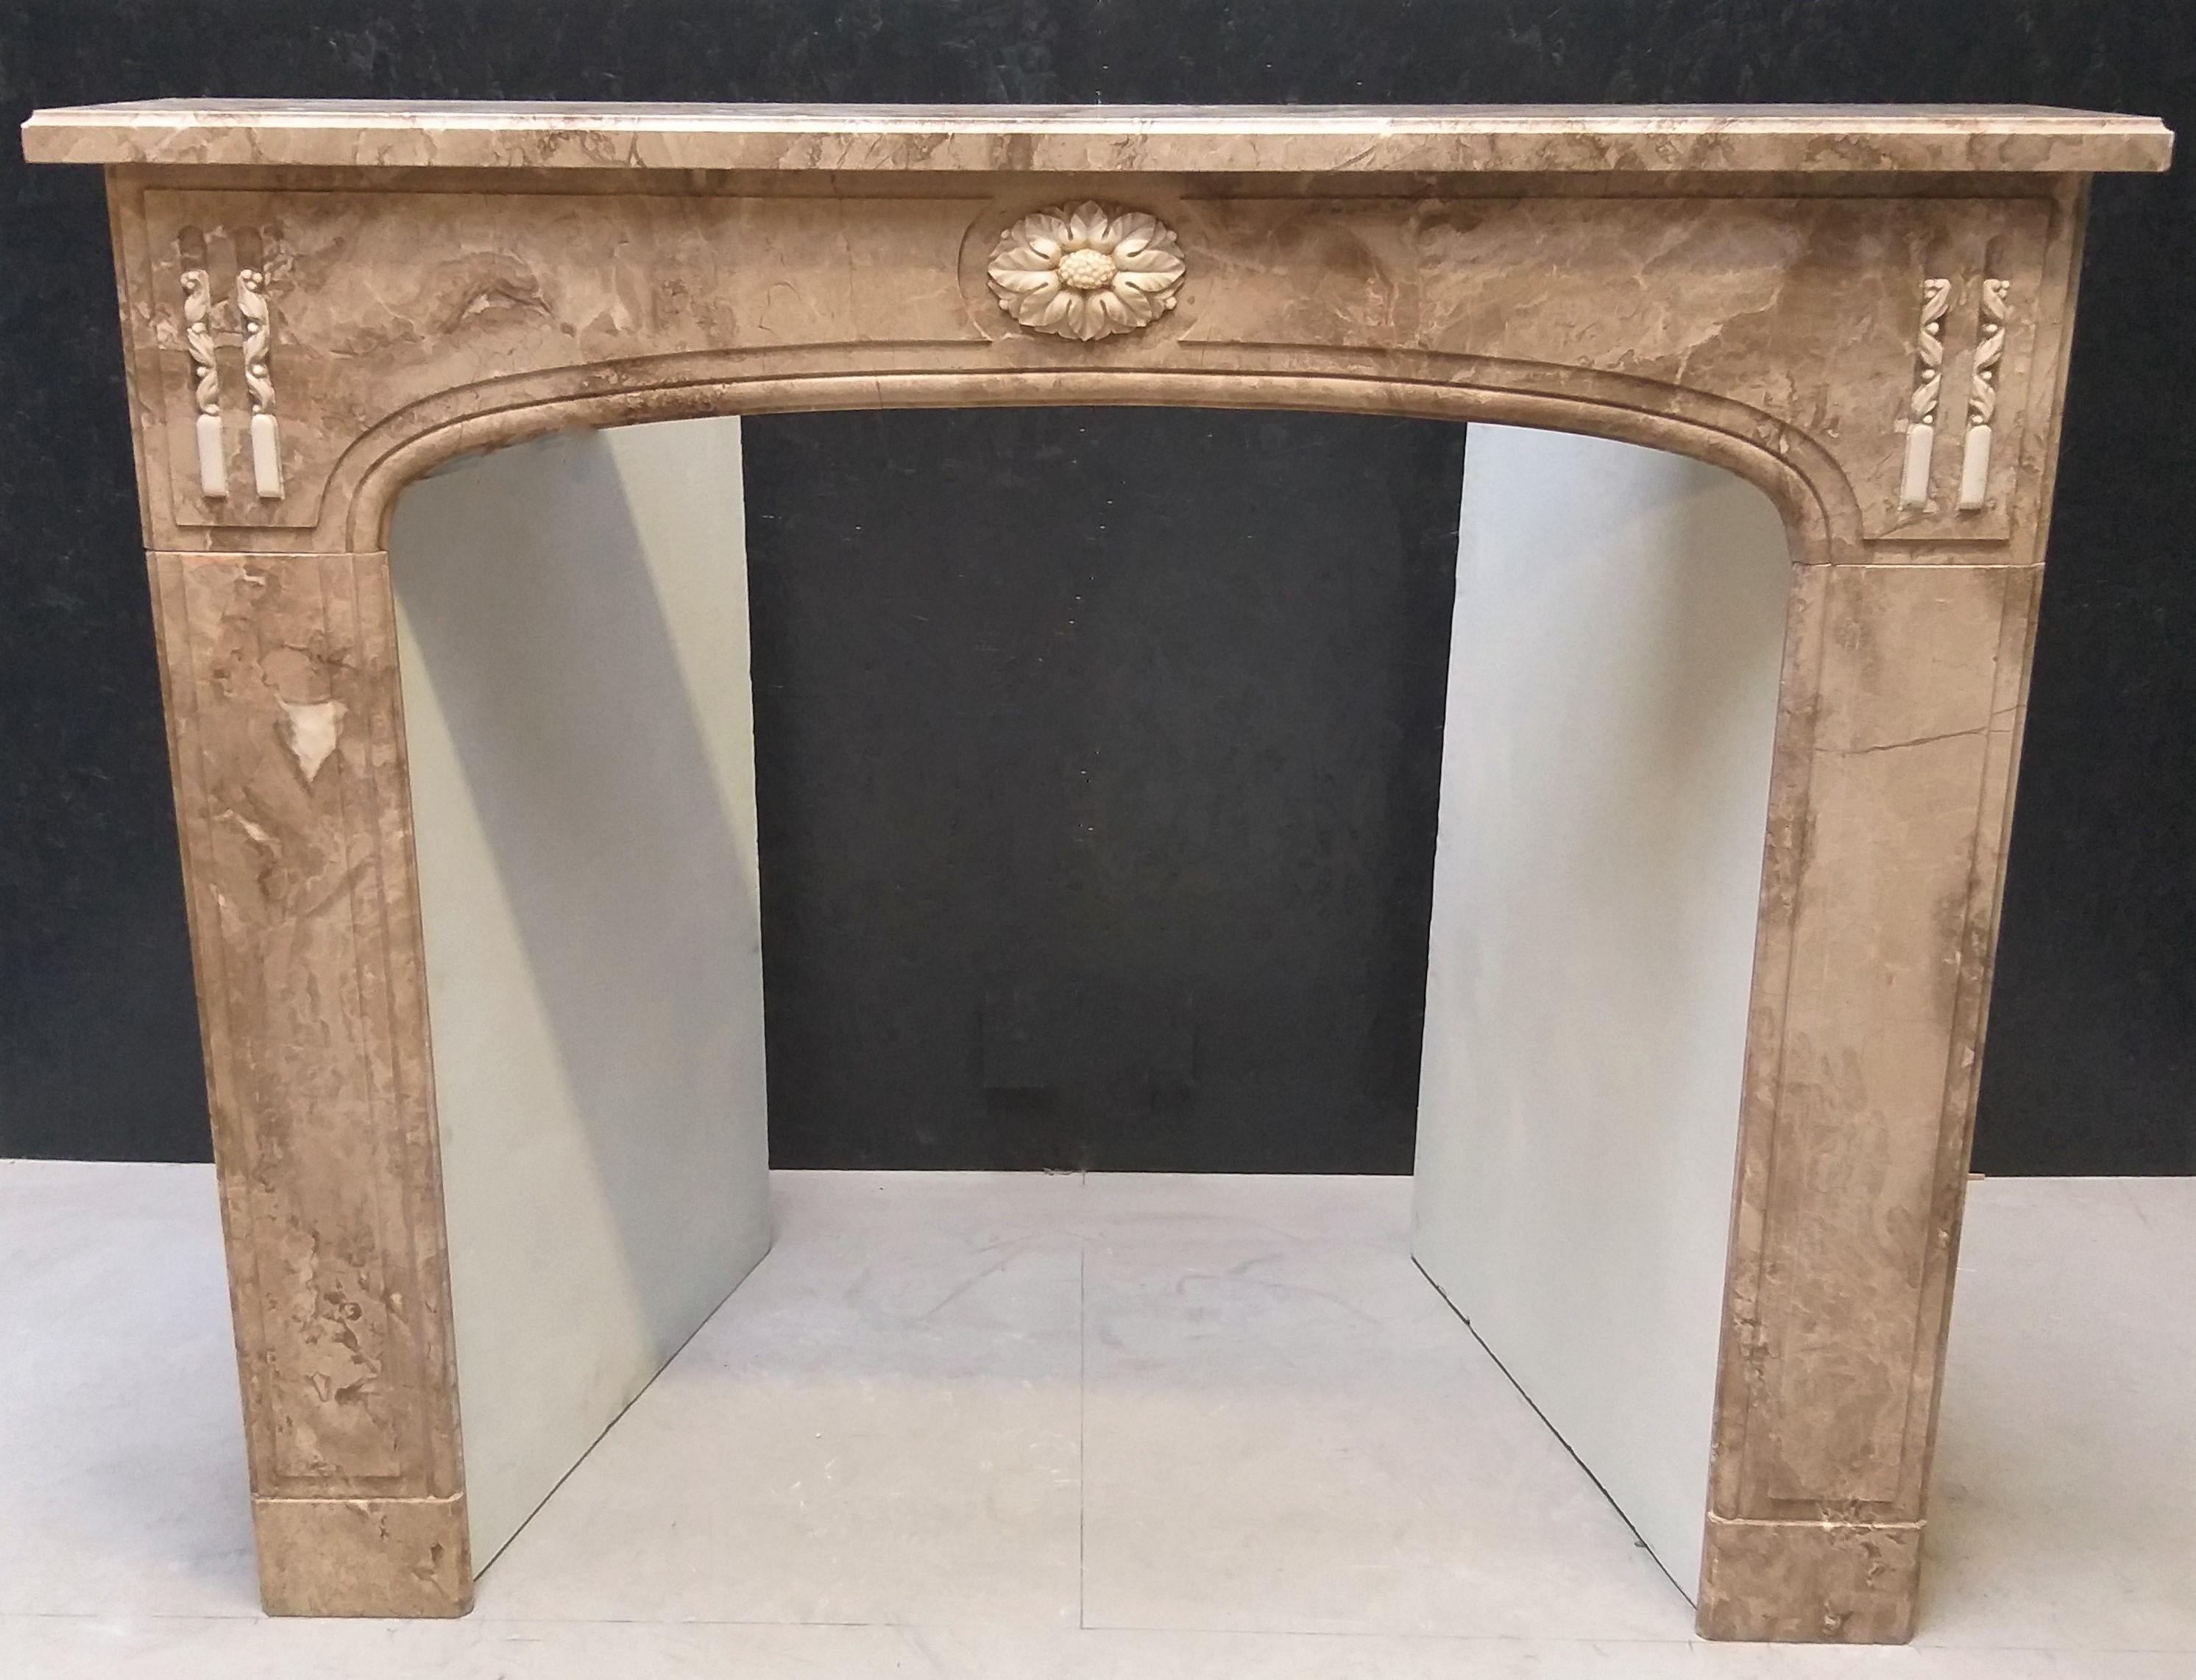 This charming antique fireplace was made out of the beloved, Italian marble Napoléon Grand Mélange, during the second half of the nineteenth century.  The center of the frieze has a nicely carved rozet of another Italian marble: Carrara.  The top of